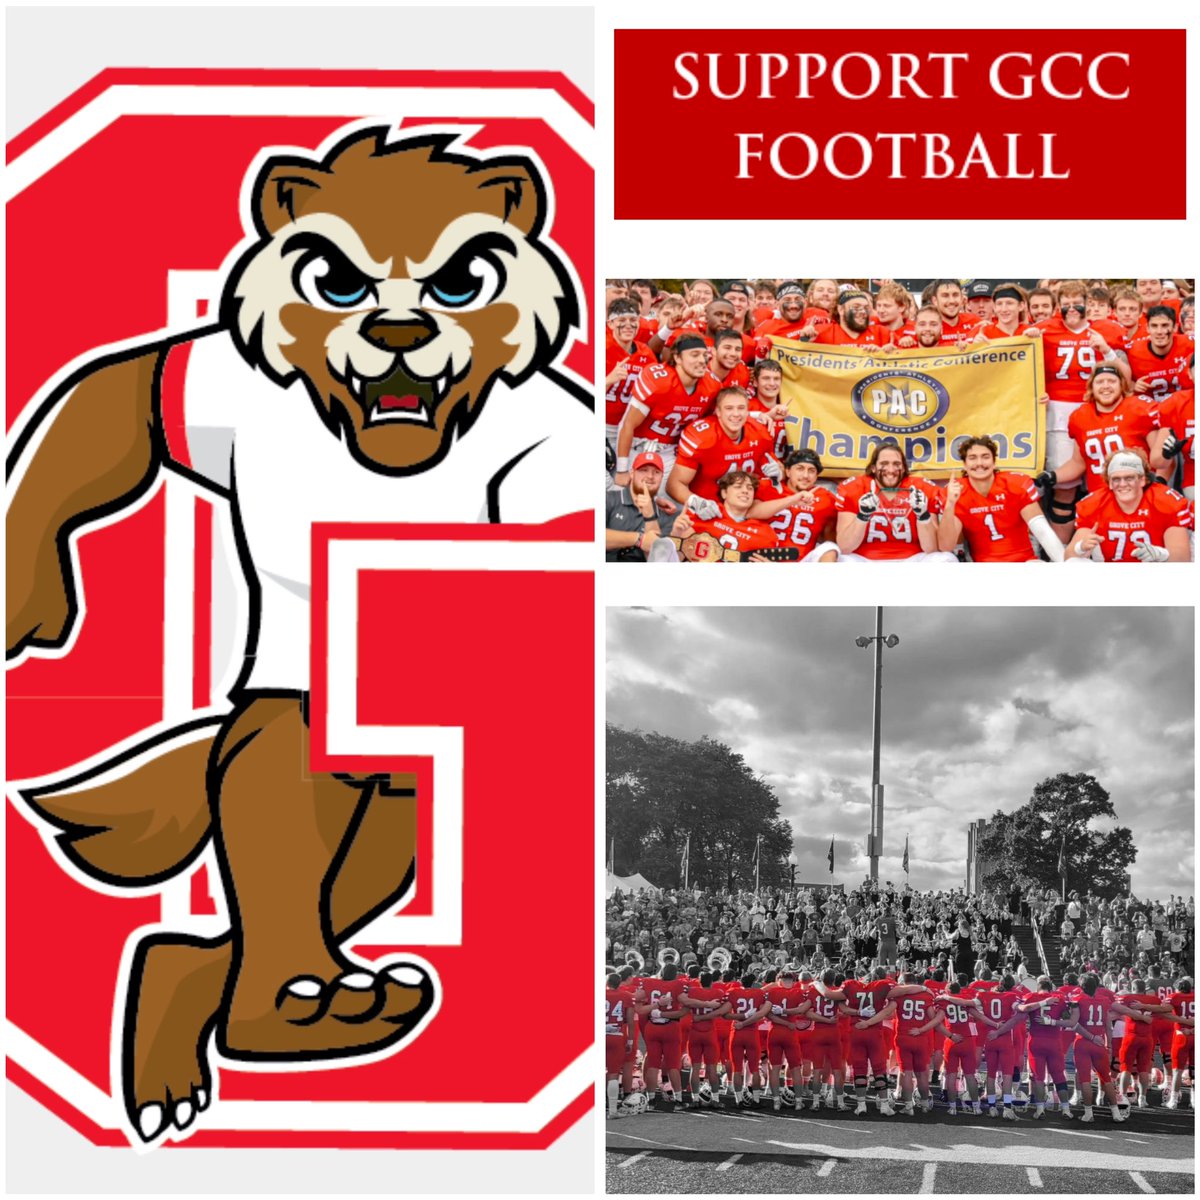 We are so incredibly thankful for any gift given! Each of us needs all of us. The support thus far has been unbelievable! Click the link listed below to hear about our football fundraiser, and how you can help! THANK YOU!! alumni.gcc.edu/s/1472/17/inte…